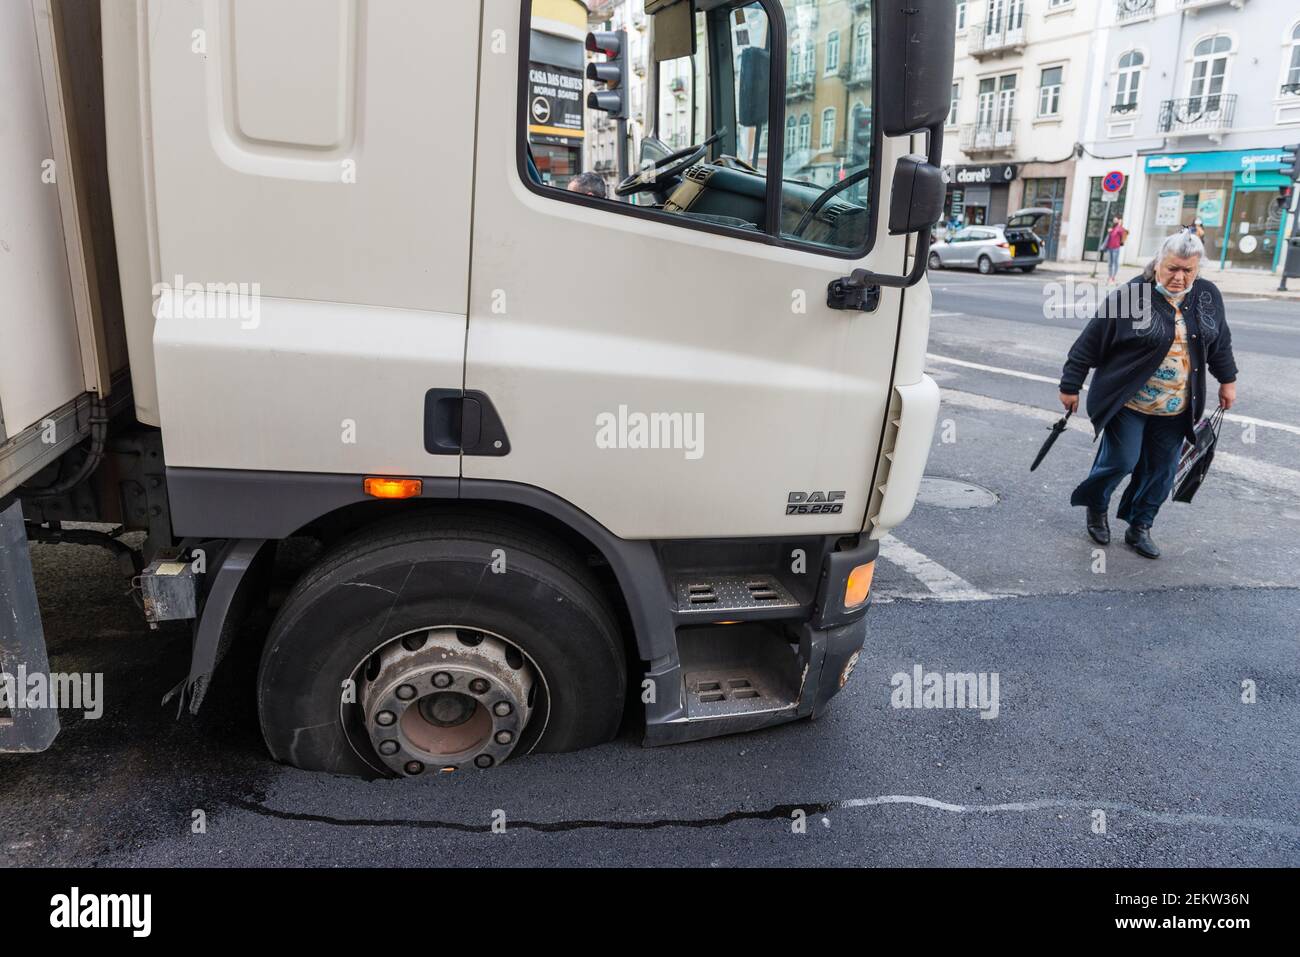 Lisbon, 10/23/2020 - Slaughter on Rua Cavaleiro de Oliveira immobilizes a  truck given that the right front wheel has pierced the pavement. The truck  was stopped at the traffic light that gives